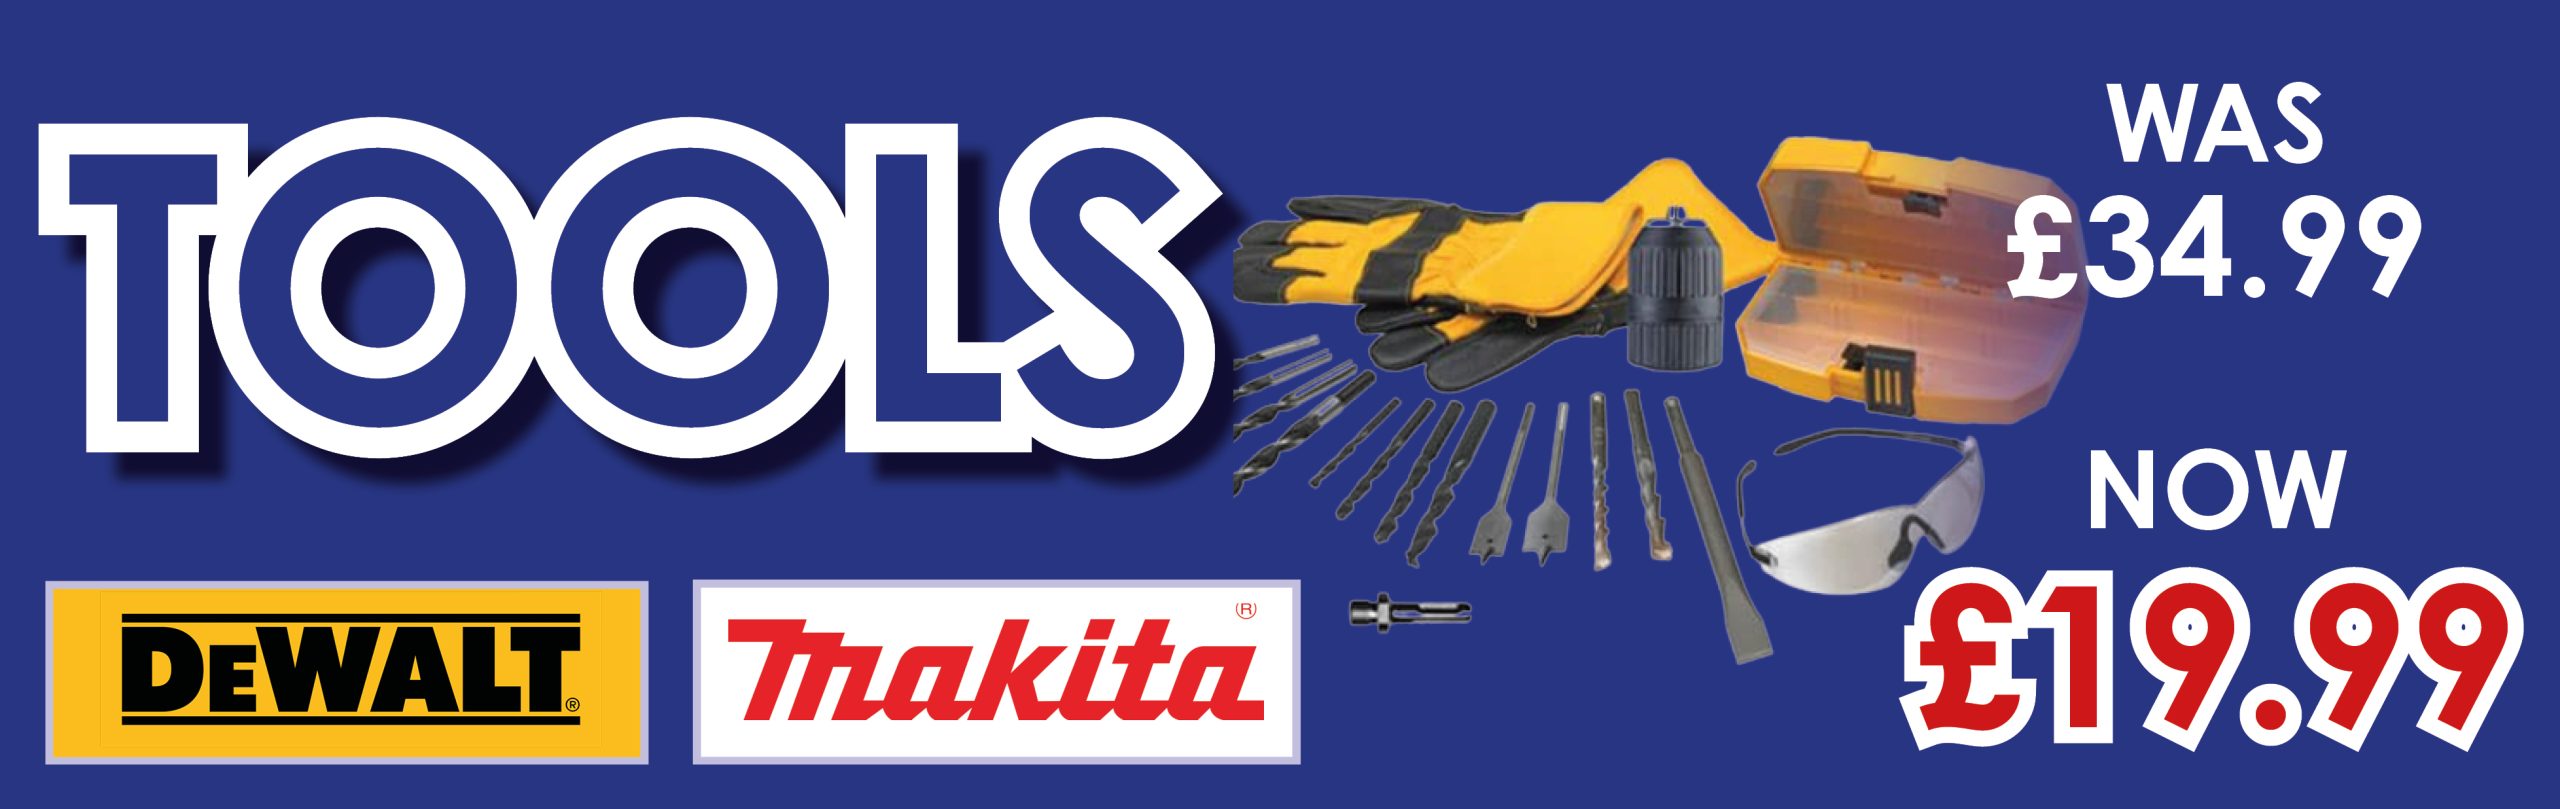 Clearance Tools Banner